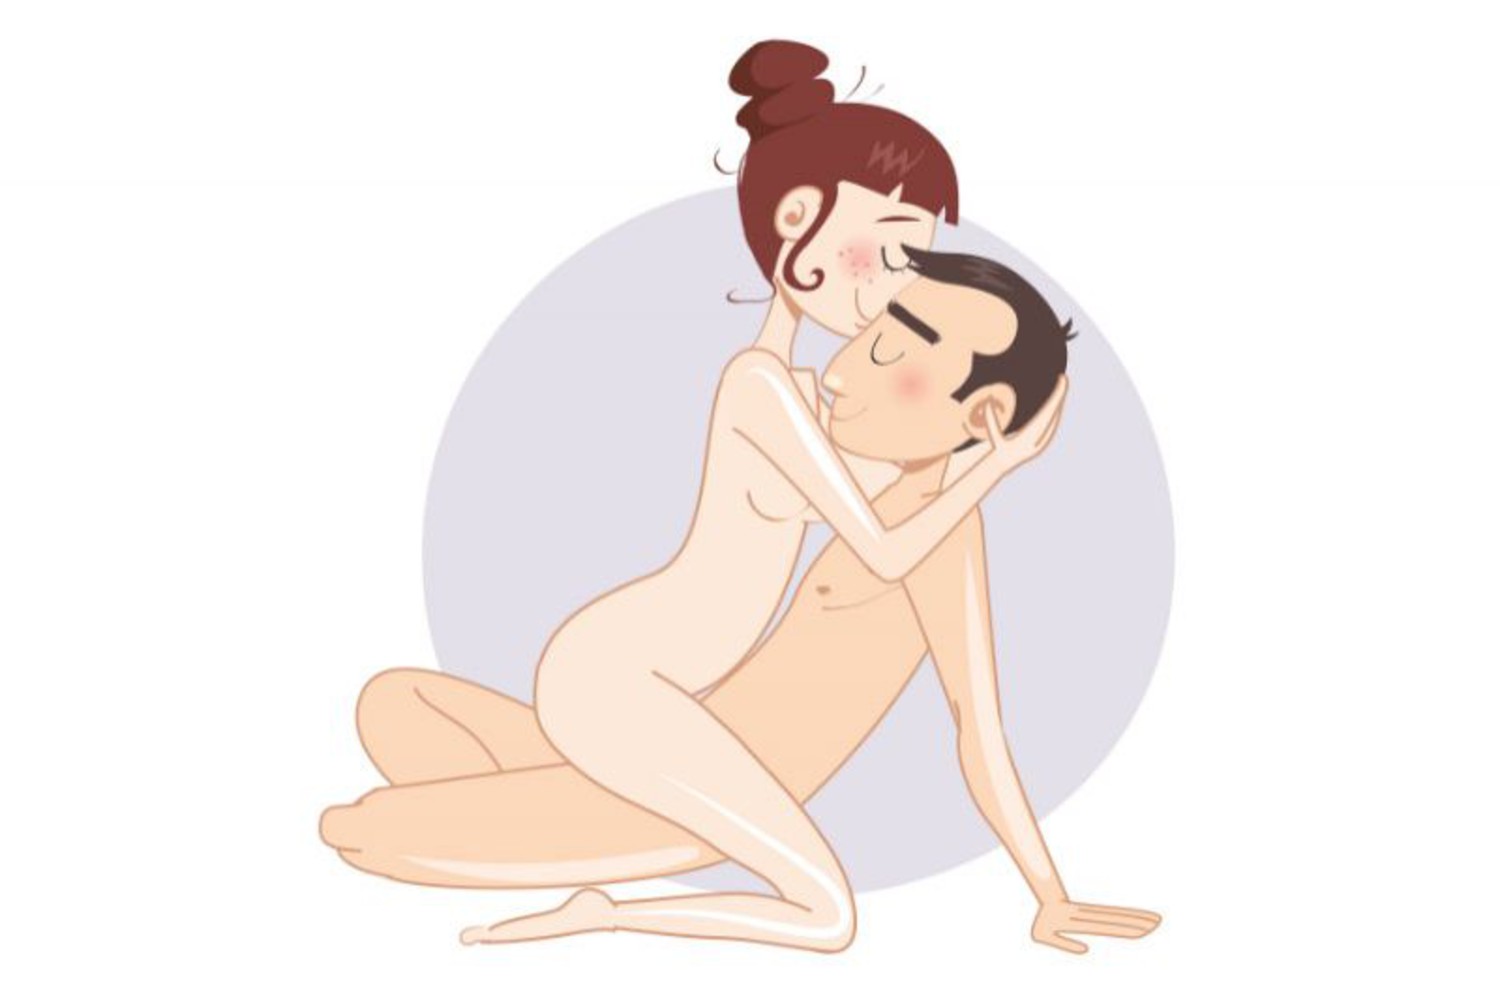 Free kama sutra sex position guide